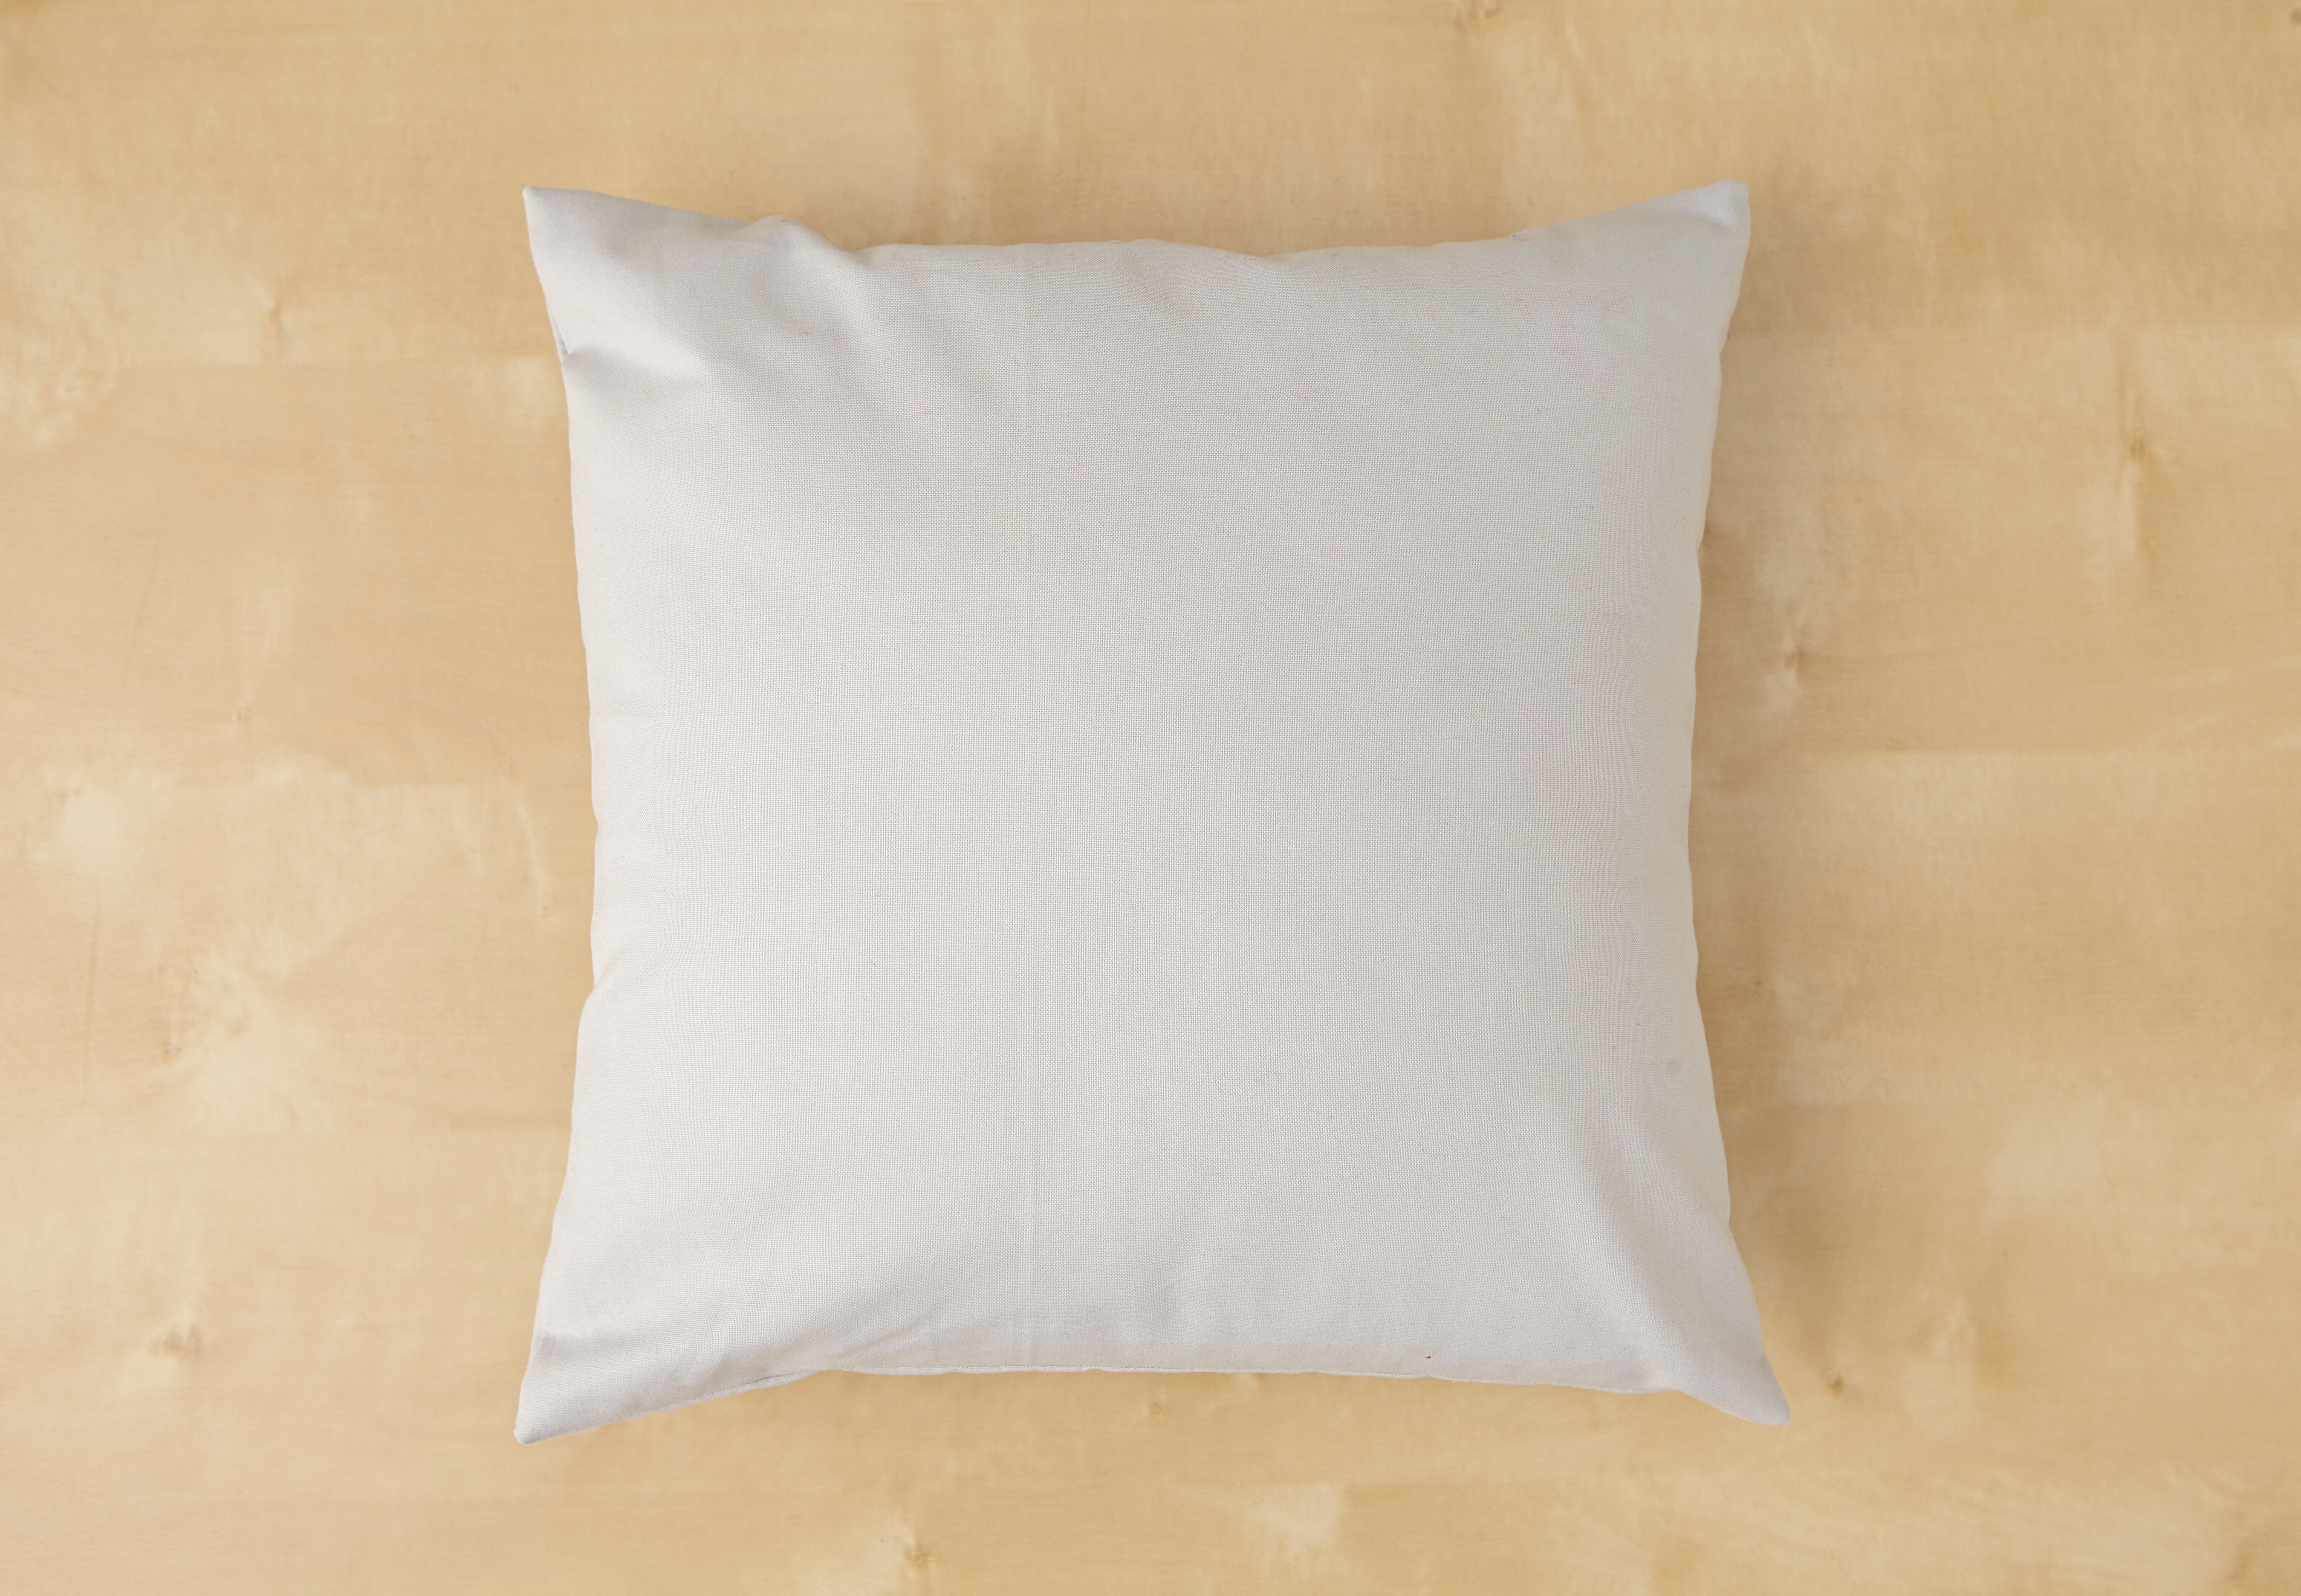 How to make a cushion cover without a zip